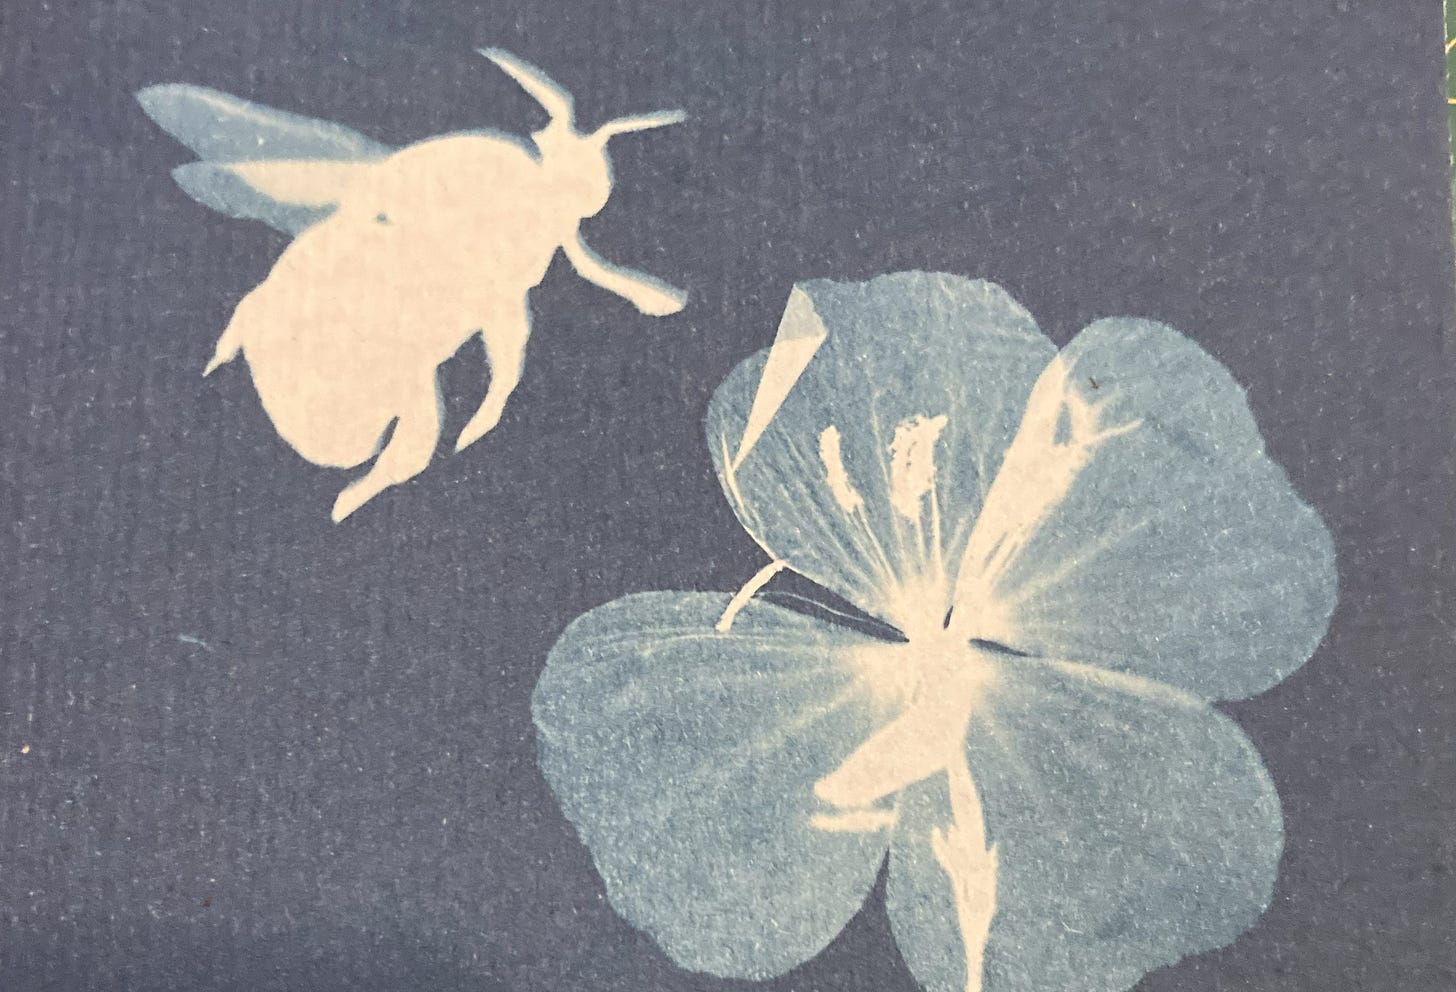 A cyanotype printed image of a bee and flower. The image is blue and white.